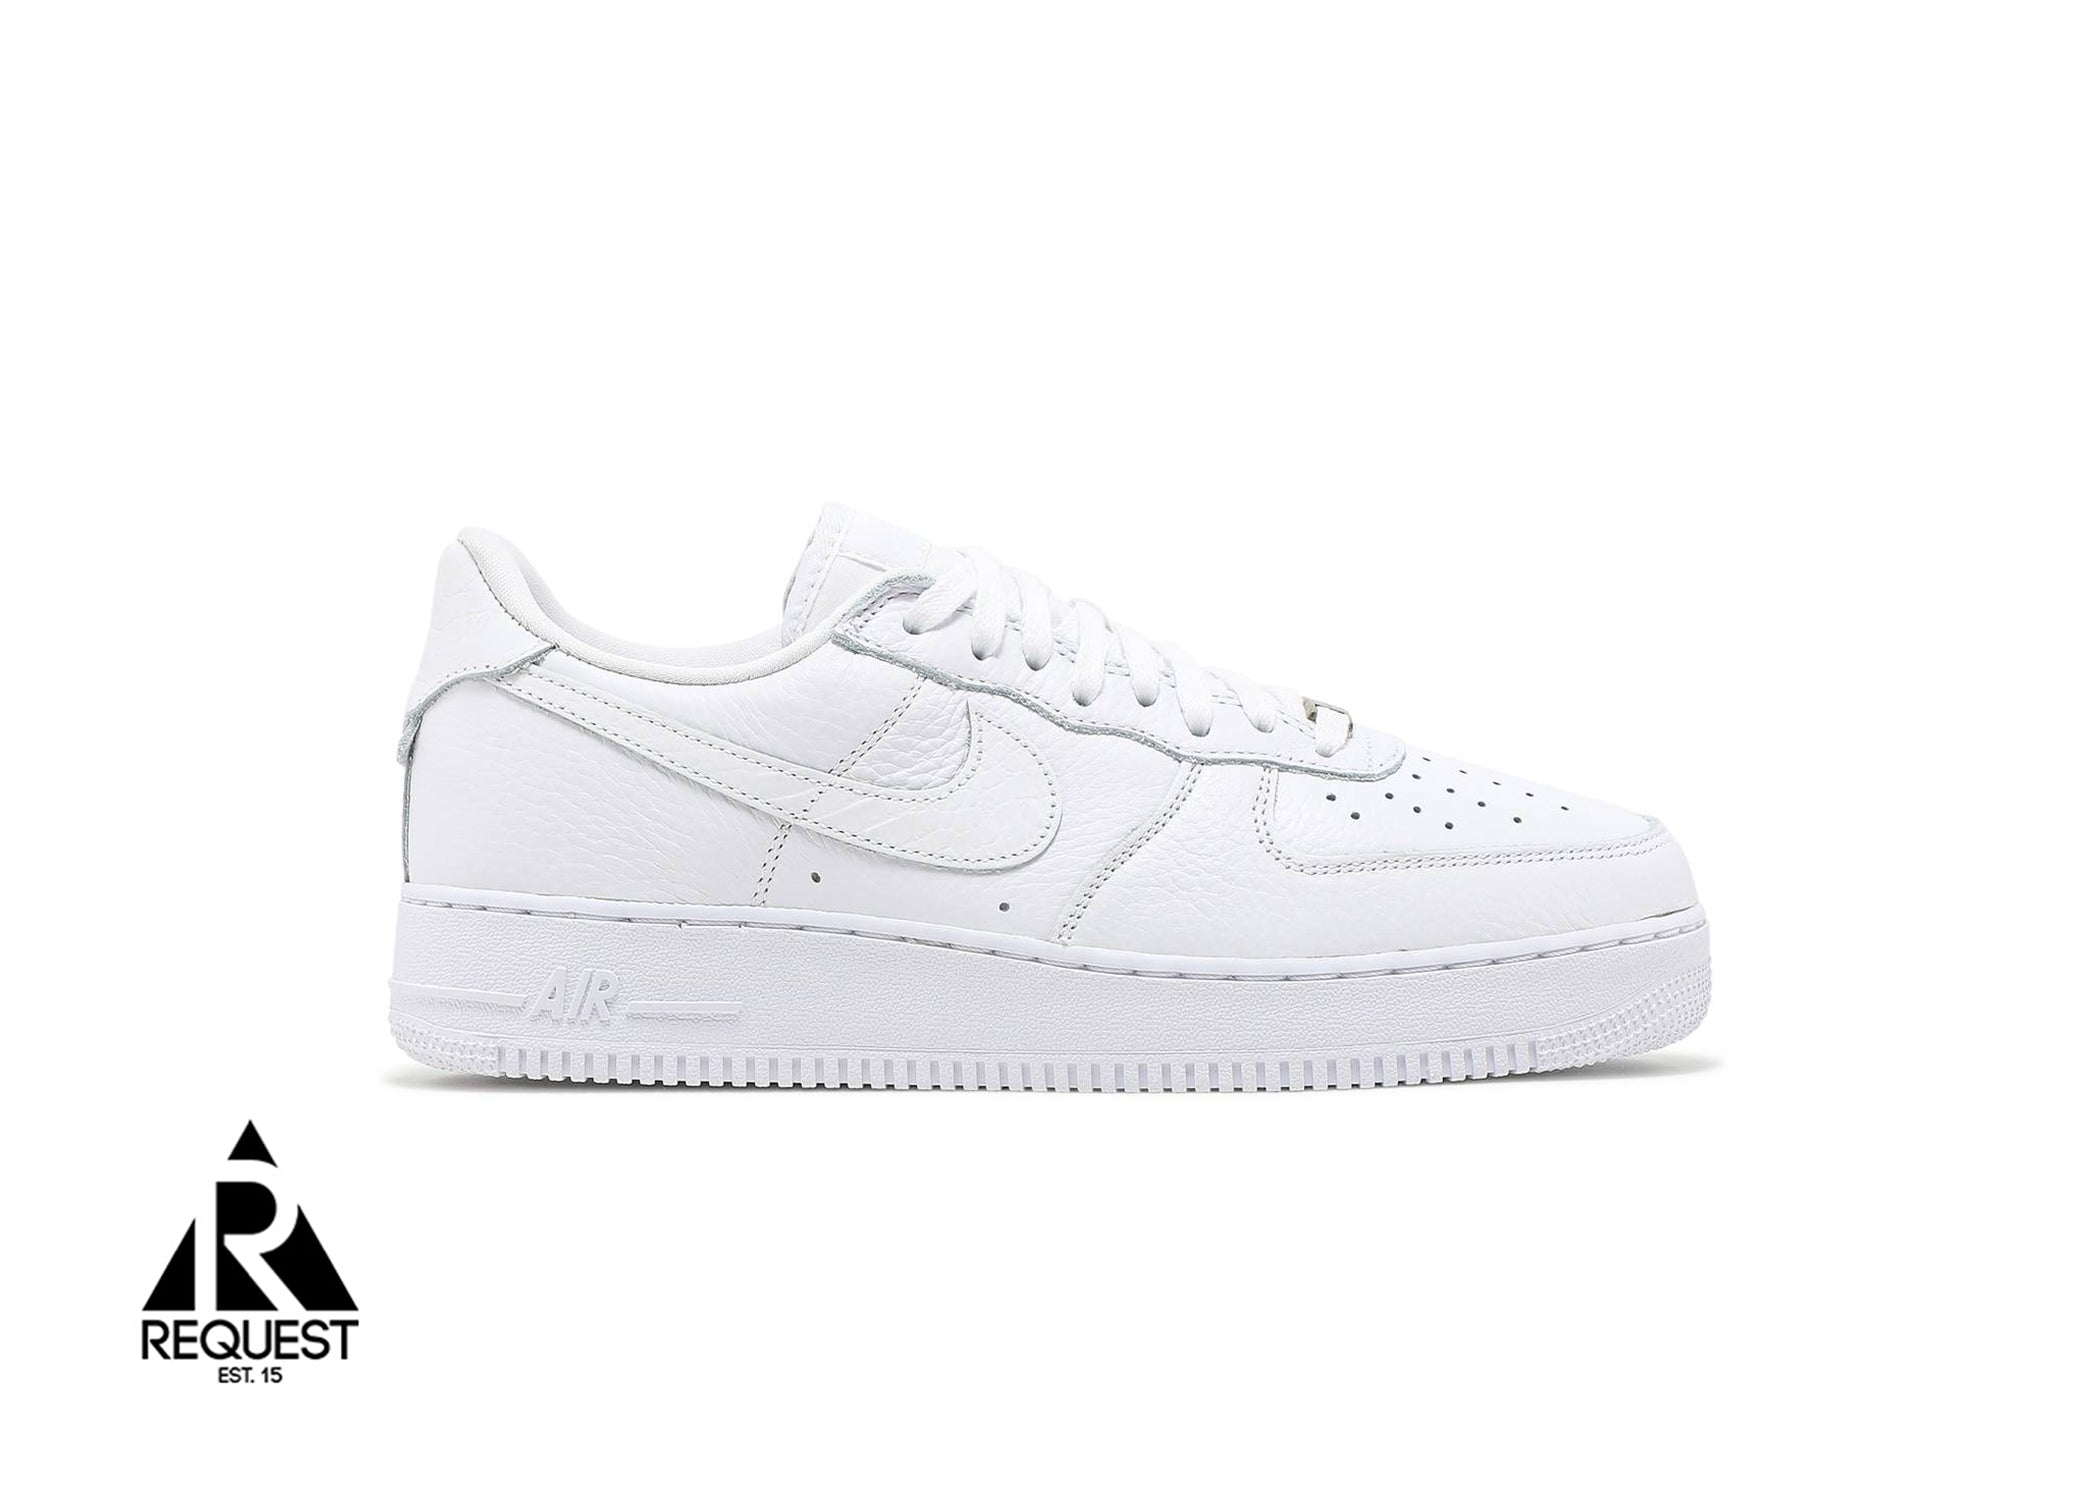 Nike Air Force 1 Low '07 Craft "Quadruple White"